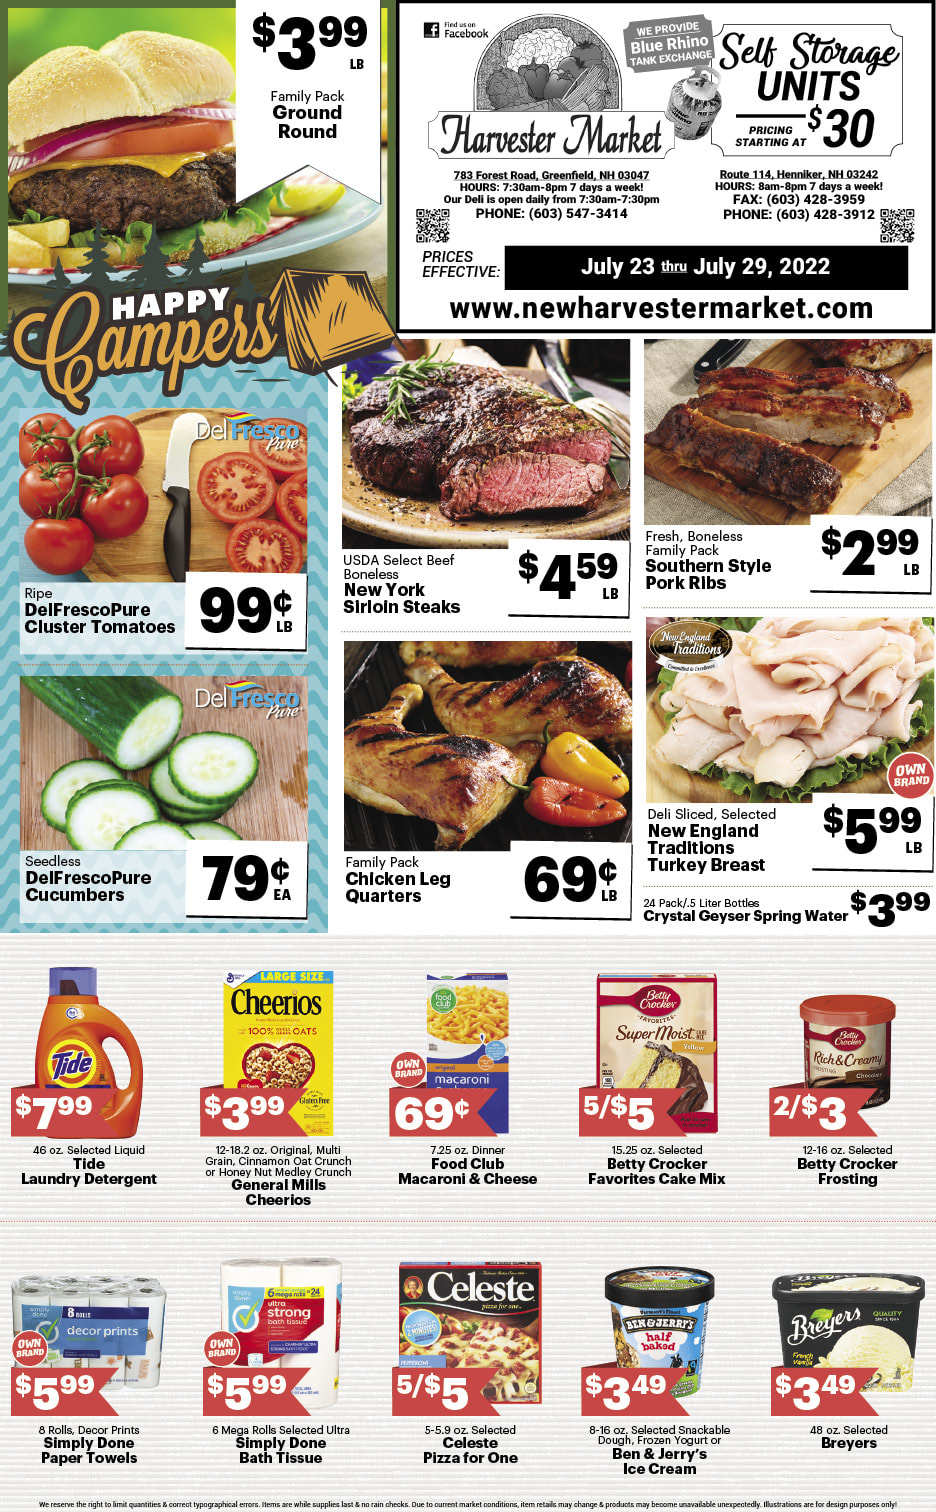 This Week's Specials - New Harvester Market